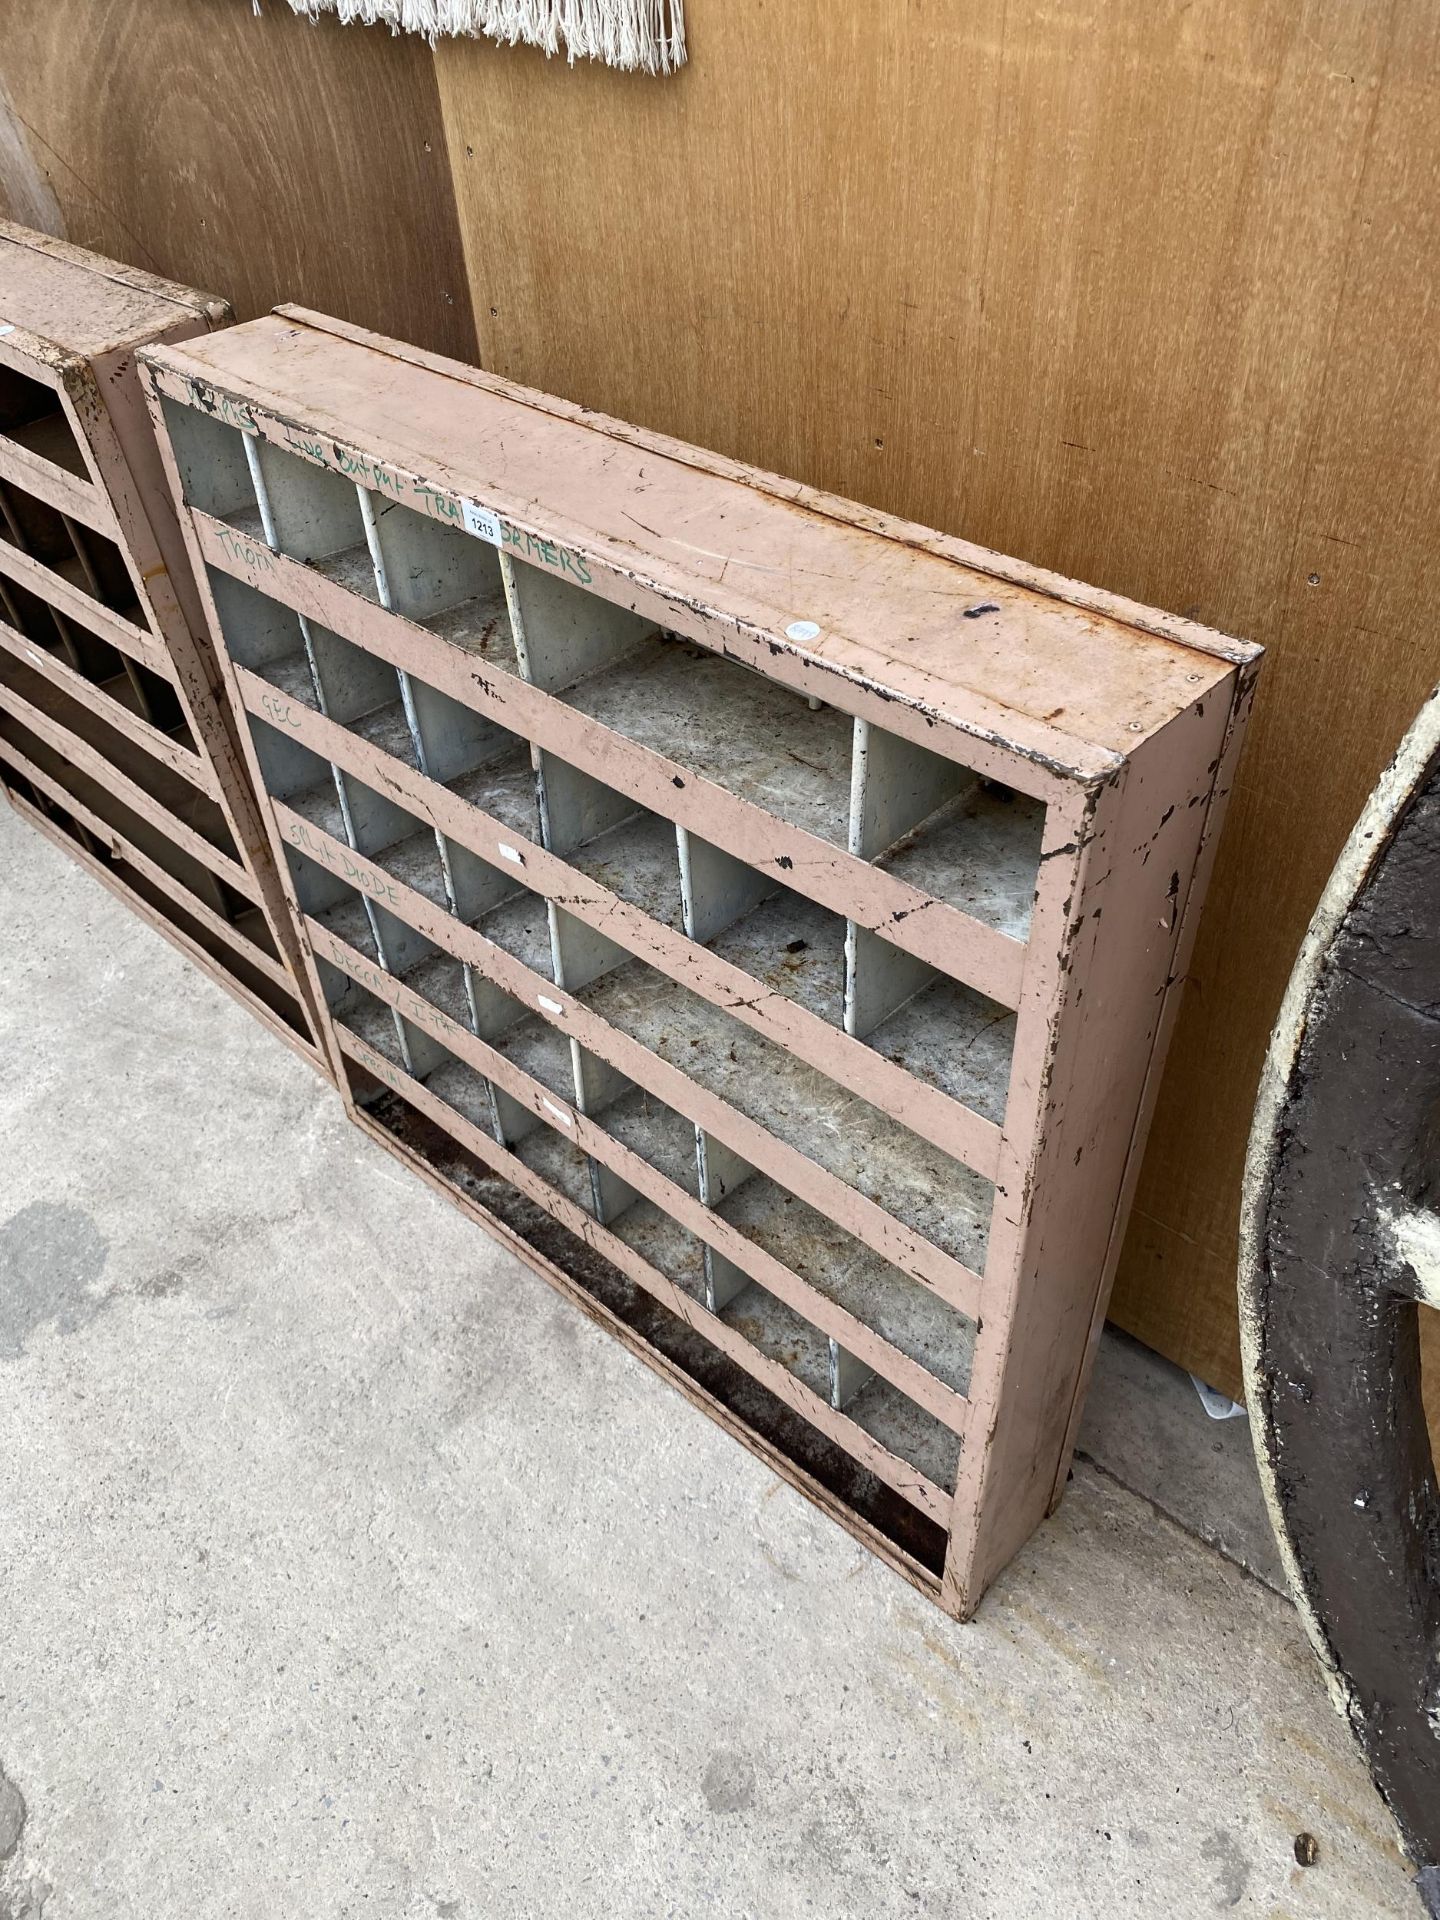 A SMALL 27 SECTION PIGEON HOLE STORAGE UNIT - Image 4 of 4